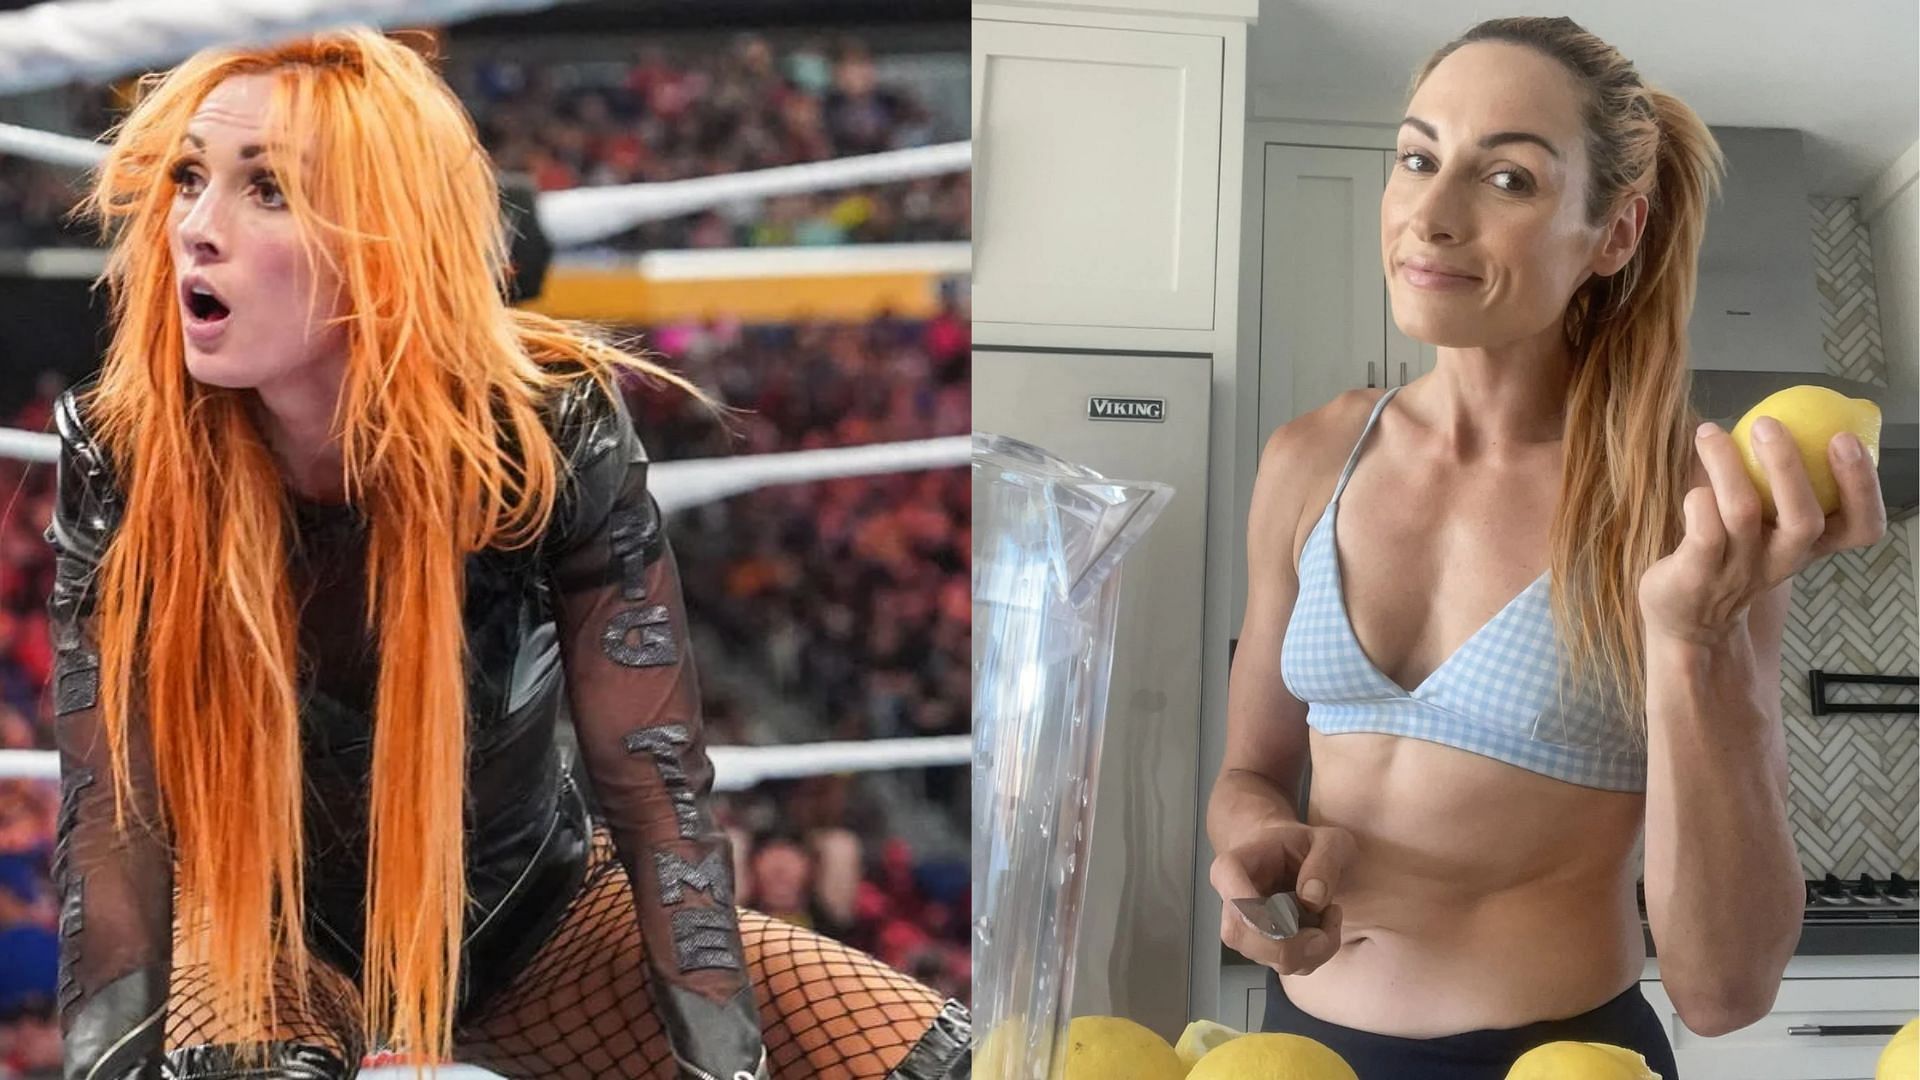 dean bussey recommends becky lynch lingerie model pic